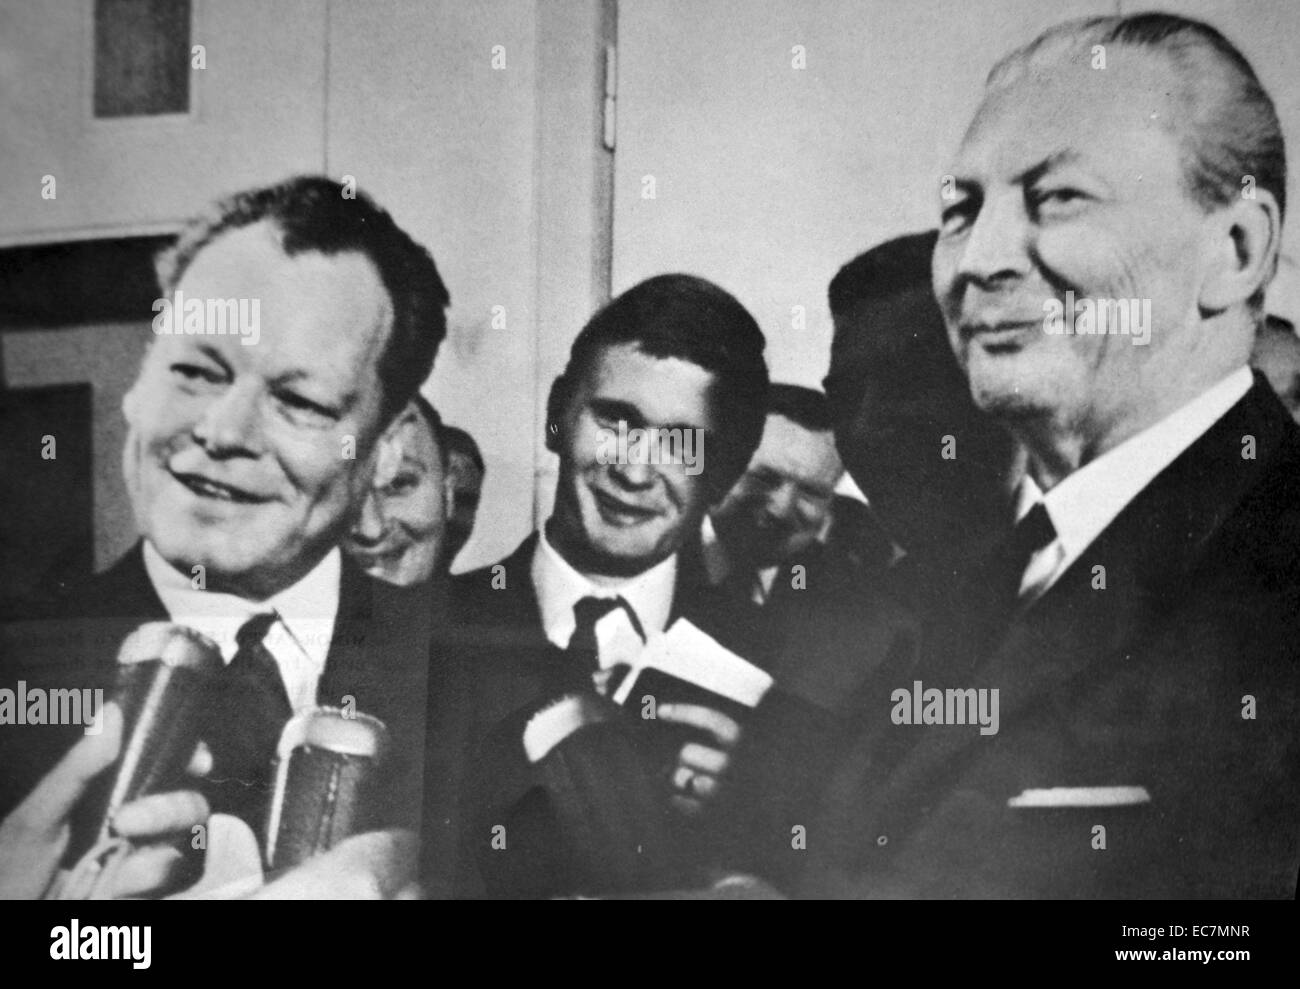 Vice chancellor Willy Brandt (1913 – 1992)  German statesman and politician with Kurt Georg Kiesinger 1904 – 1988 Chancellor of West Germany 1966- 1969 with Stock Photo